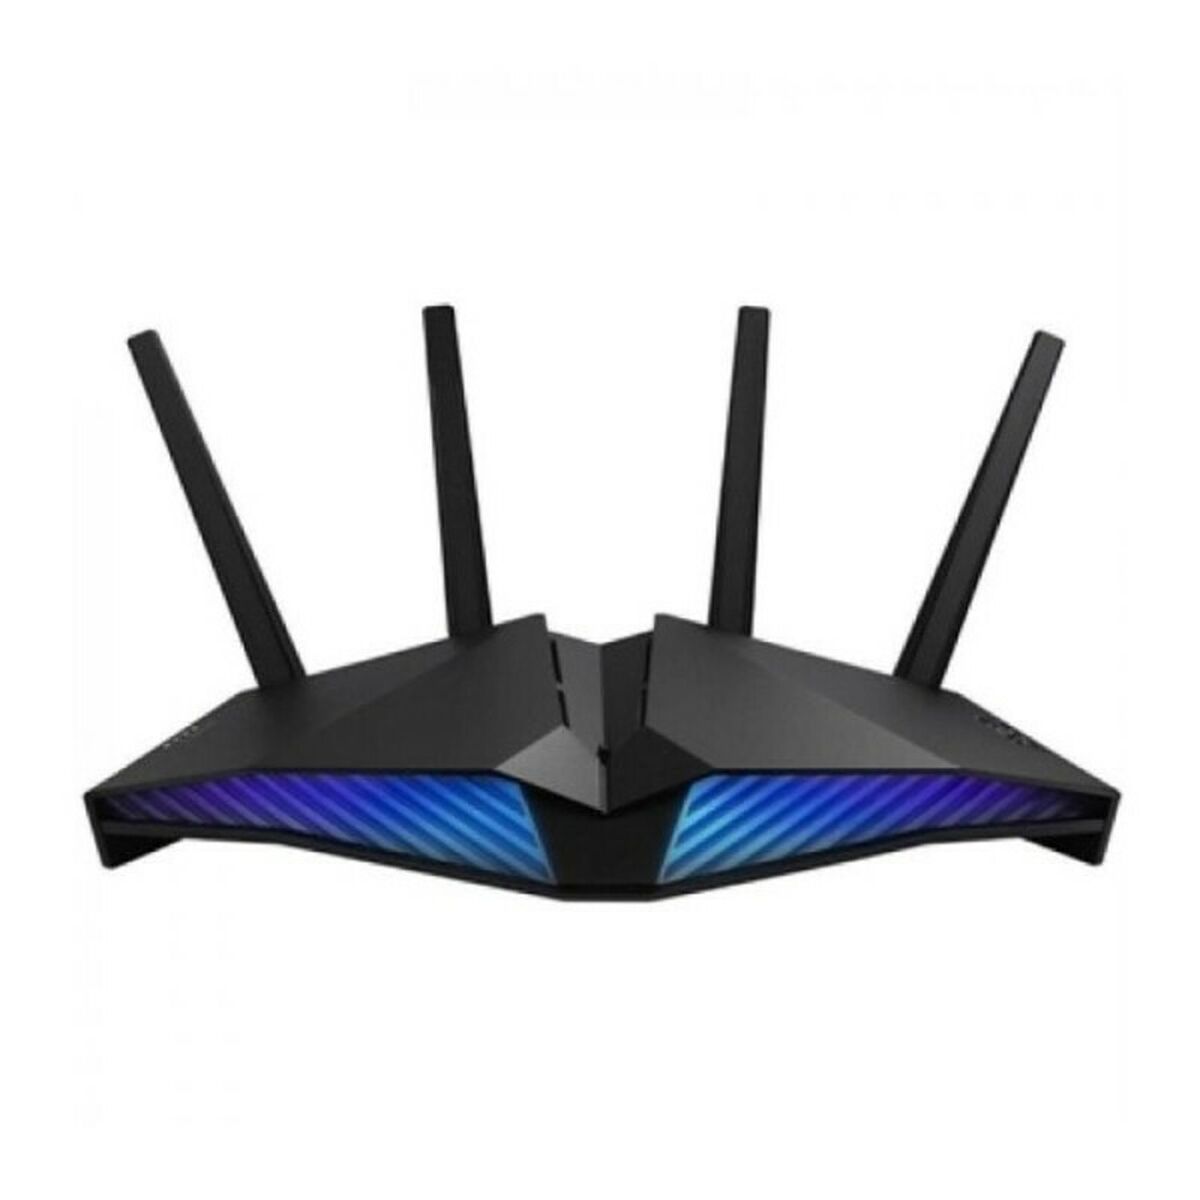 Wireless Modem Asus DSL-AX82U LAN WiFi 2,4 / 5 GHz 5400 Mbps Black, Asus, Computing, Network devices, wireless-modem-asus-dsl-ax82u-lan-wifi-2-4-5-ghz-5400-mbps-black, Brand_Asus, category-reference-2609, category-reference-2803, category-reference-2826, category-reference-t-19685, category-reference-t-19914, Condition_NEW, networks/wiring, Price_200 - 300, Teleworking, RiotNook